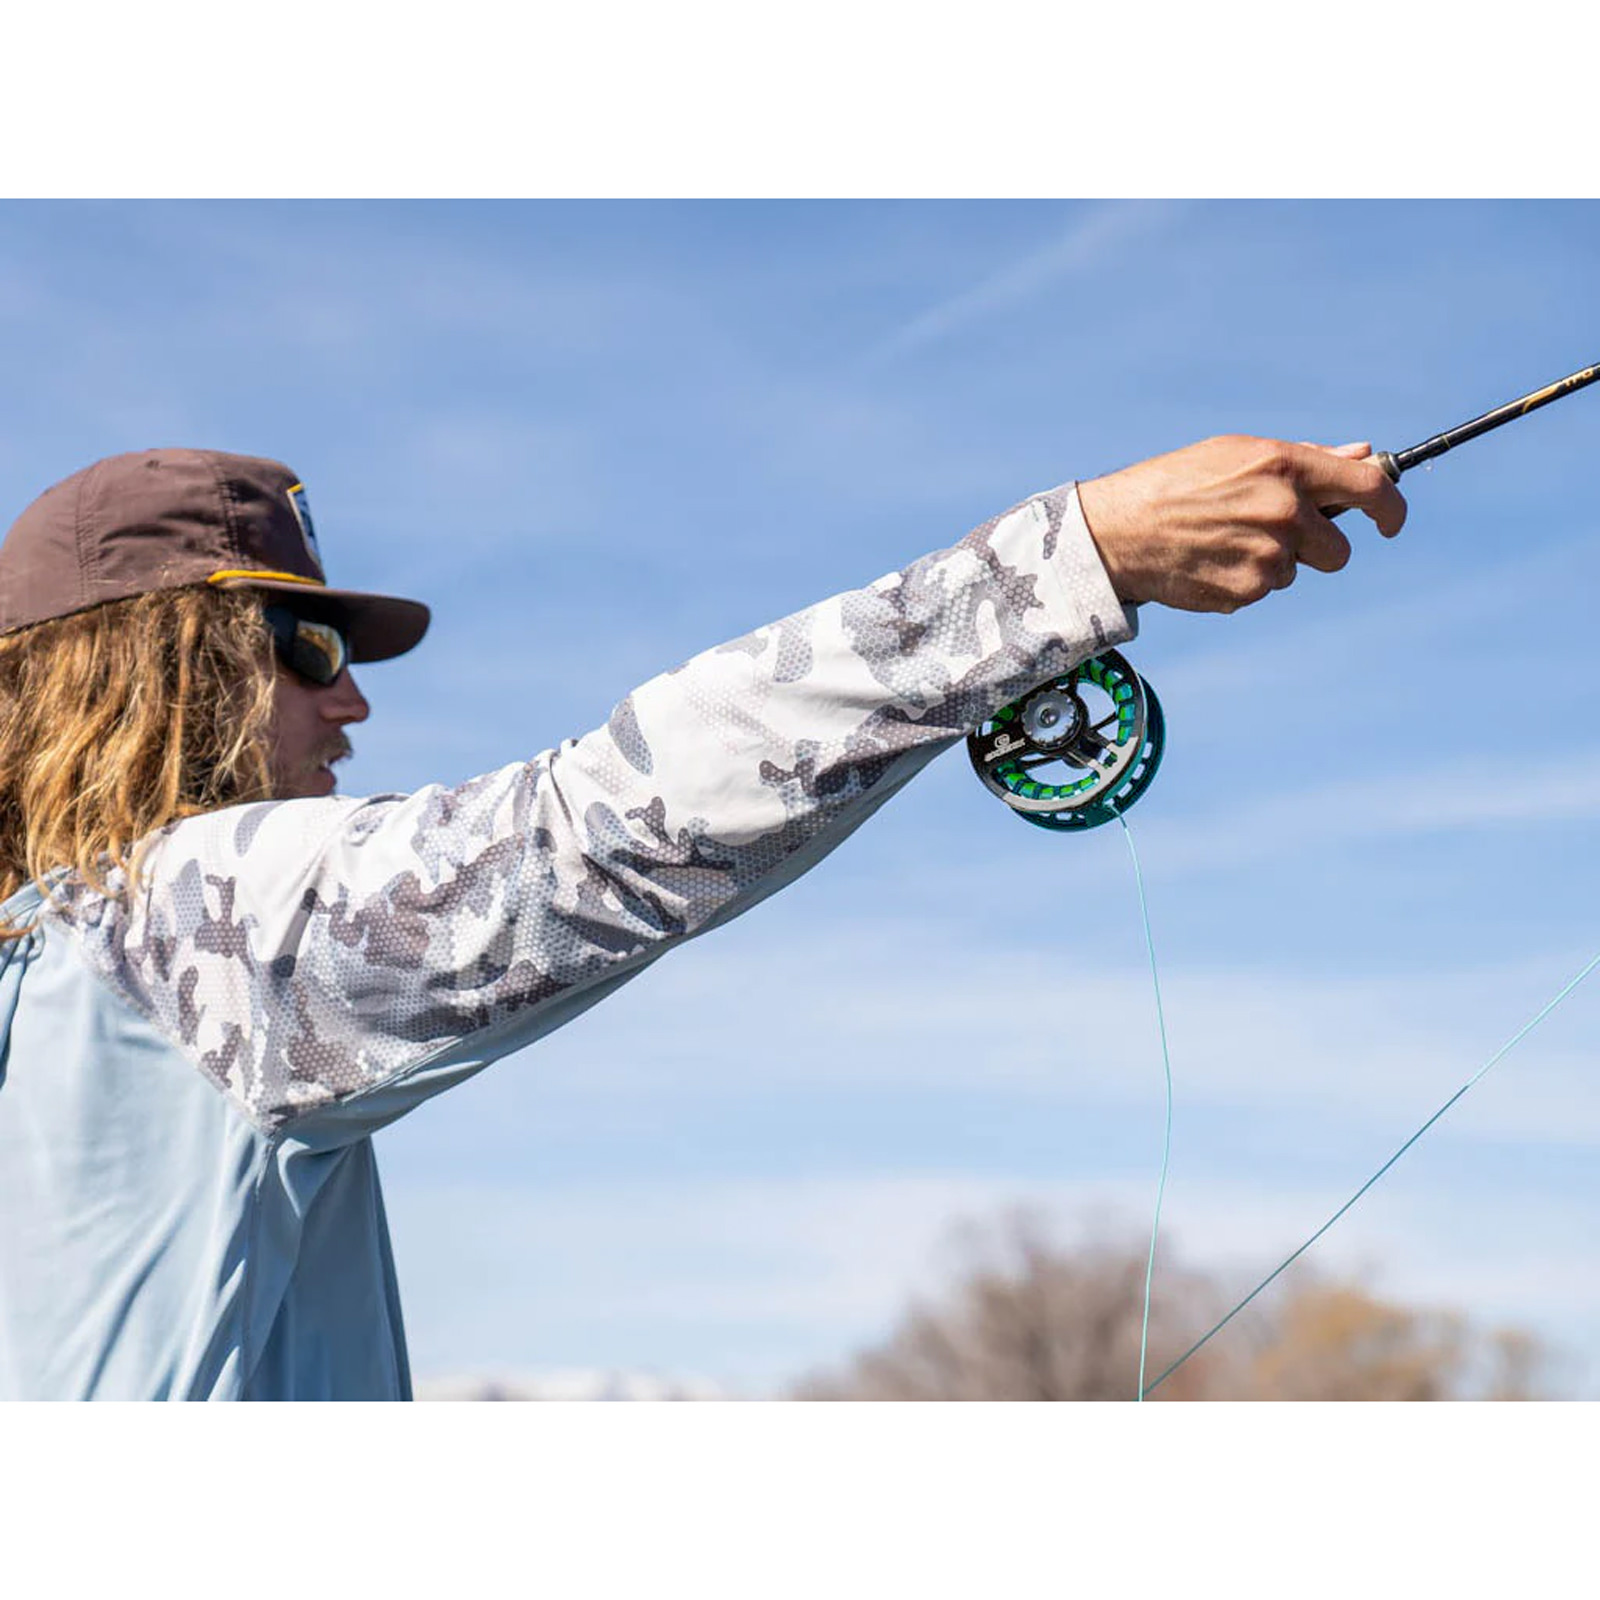 Cheeky PreLoad 2.0 Fly Reel Specifications - Cheeky Fishing